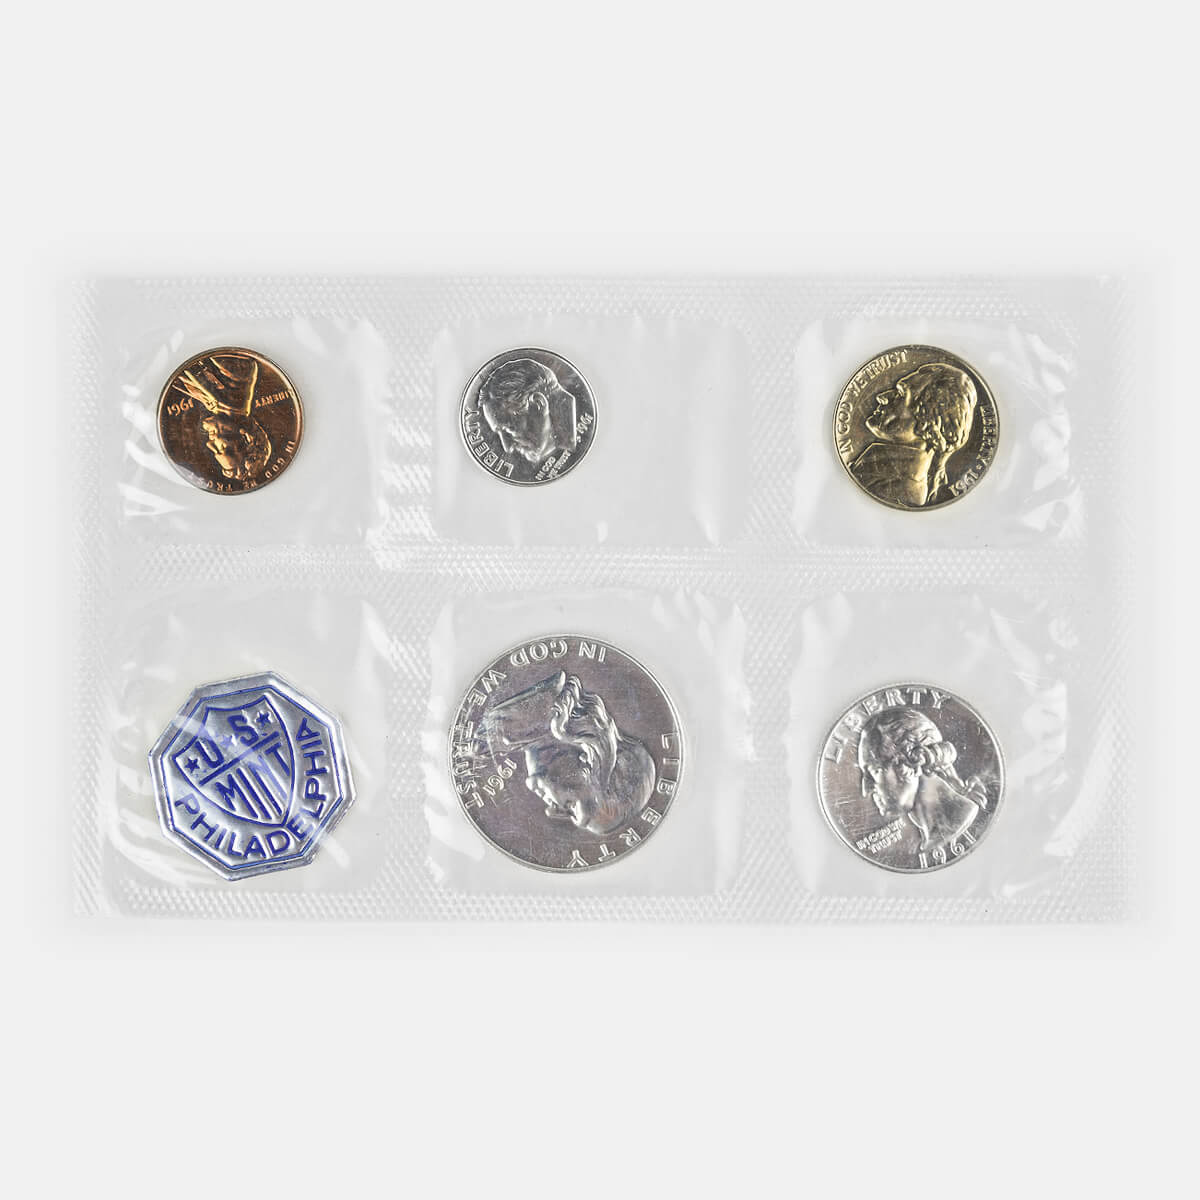 Rare proof set of coins